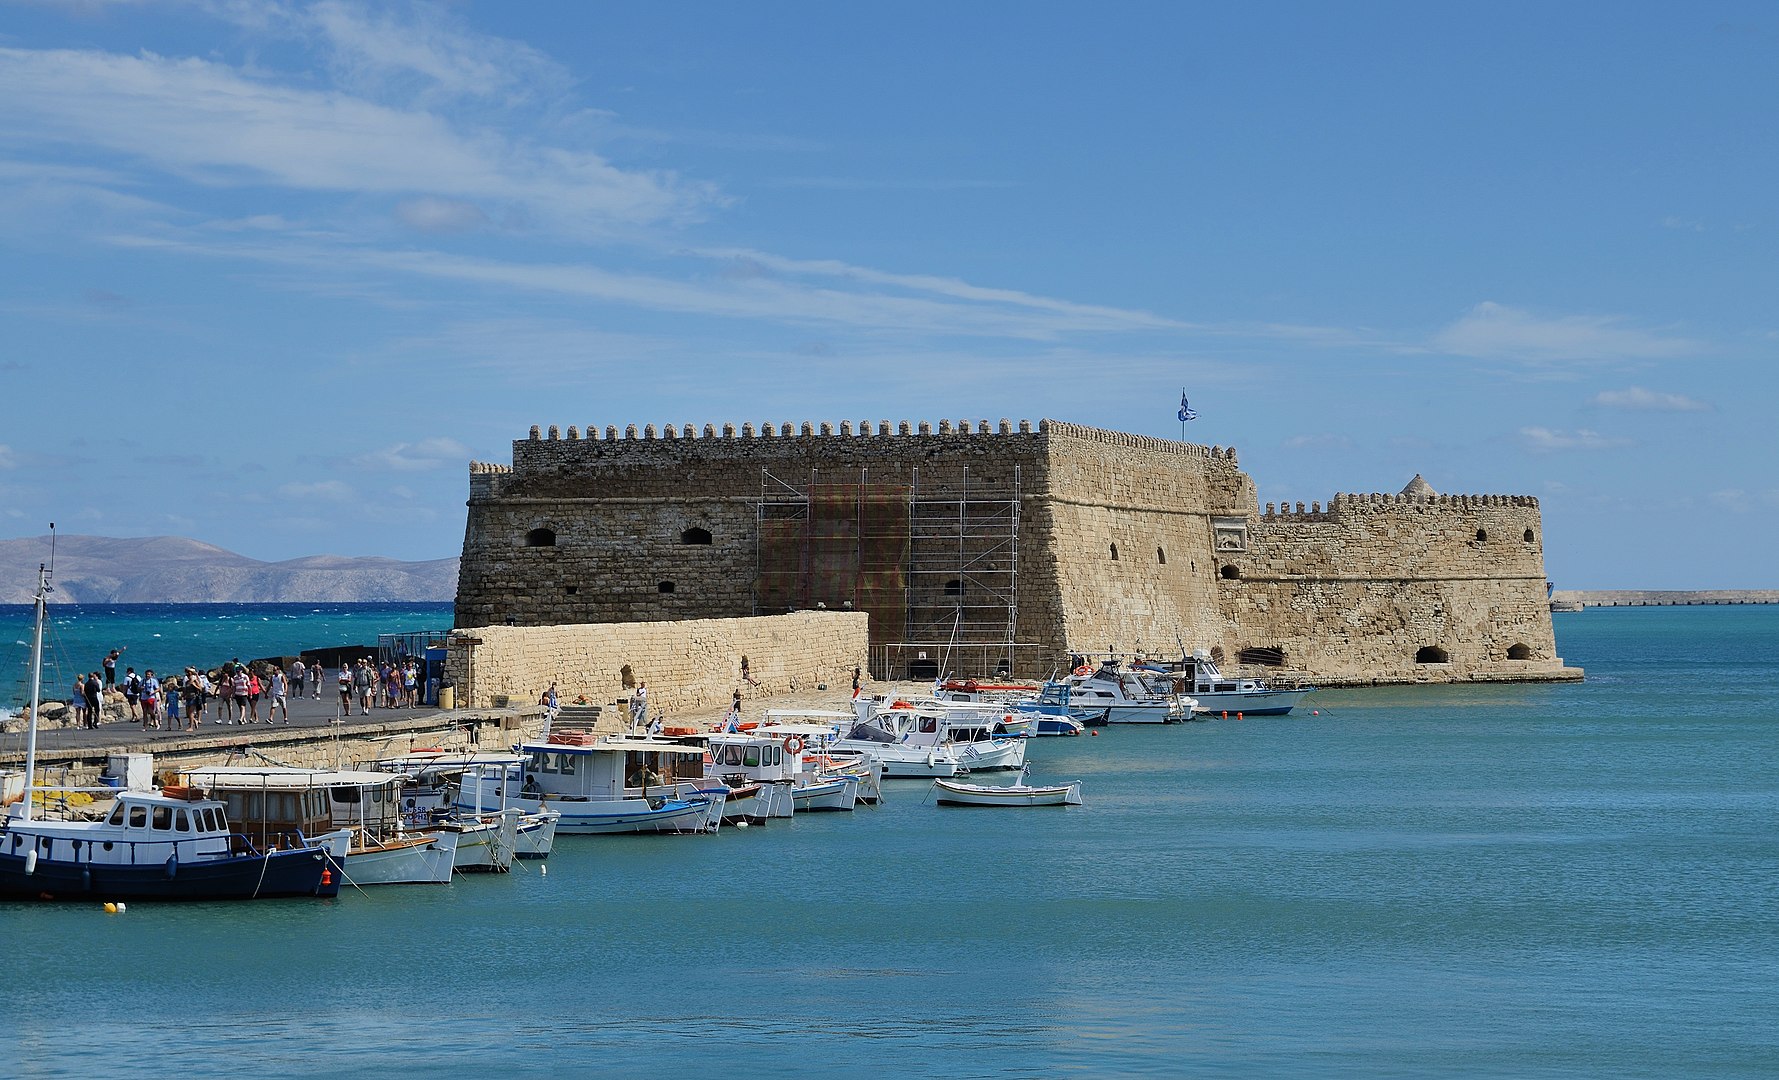 The Venetian fortress of Koules/Castello a Mare (1523–1540) guards the inner harbor of Heraklion